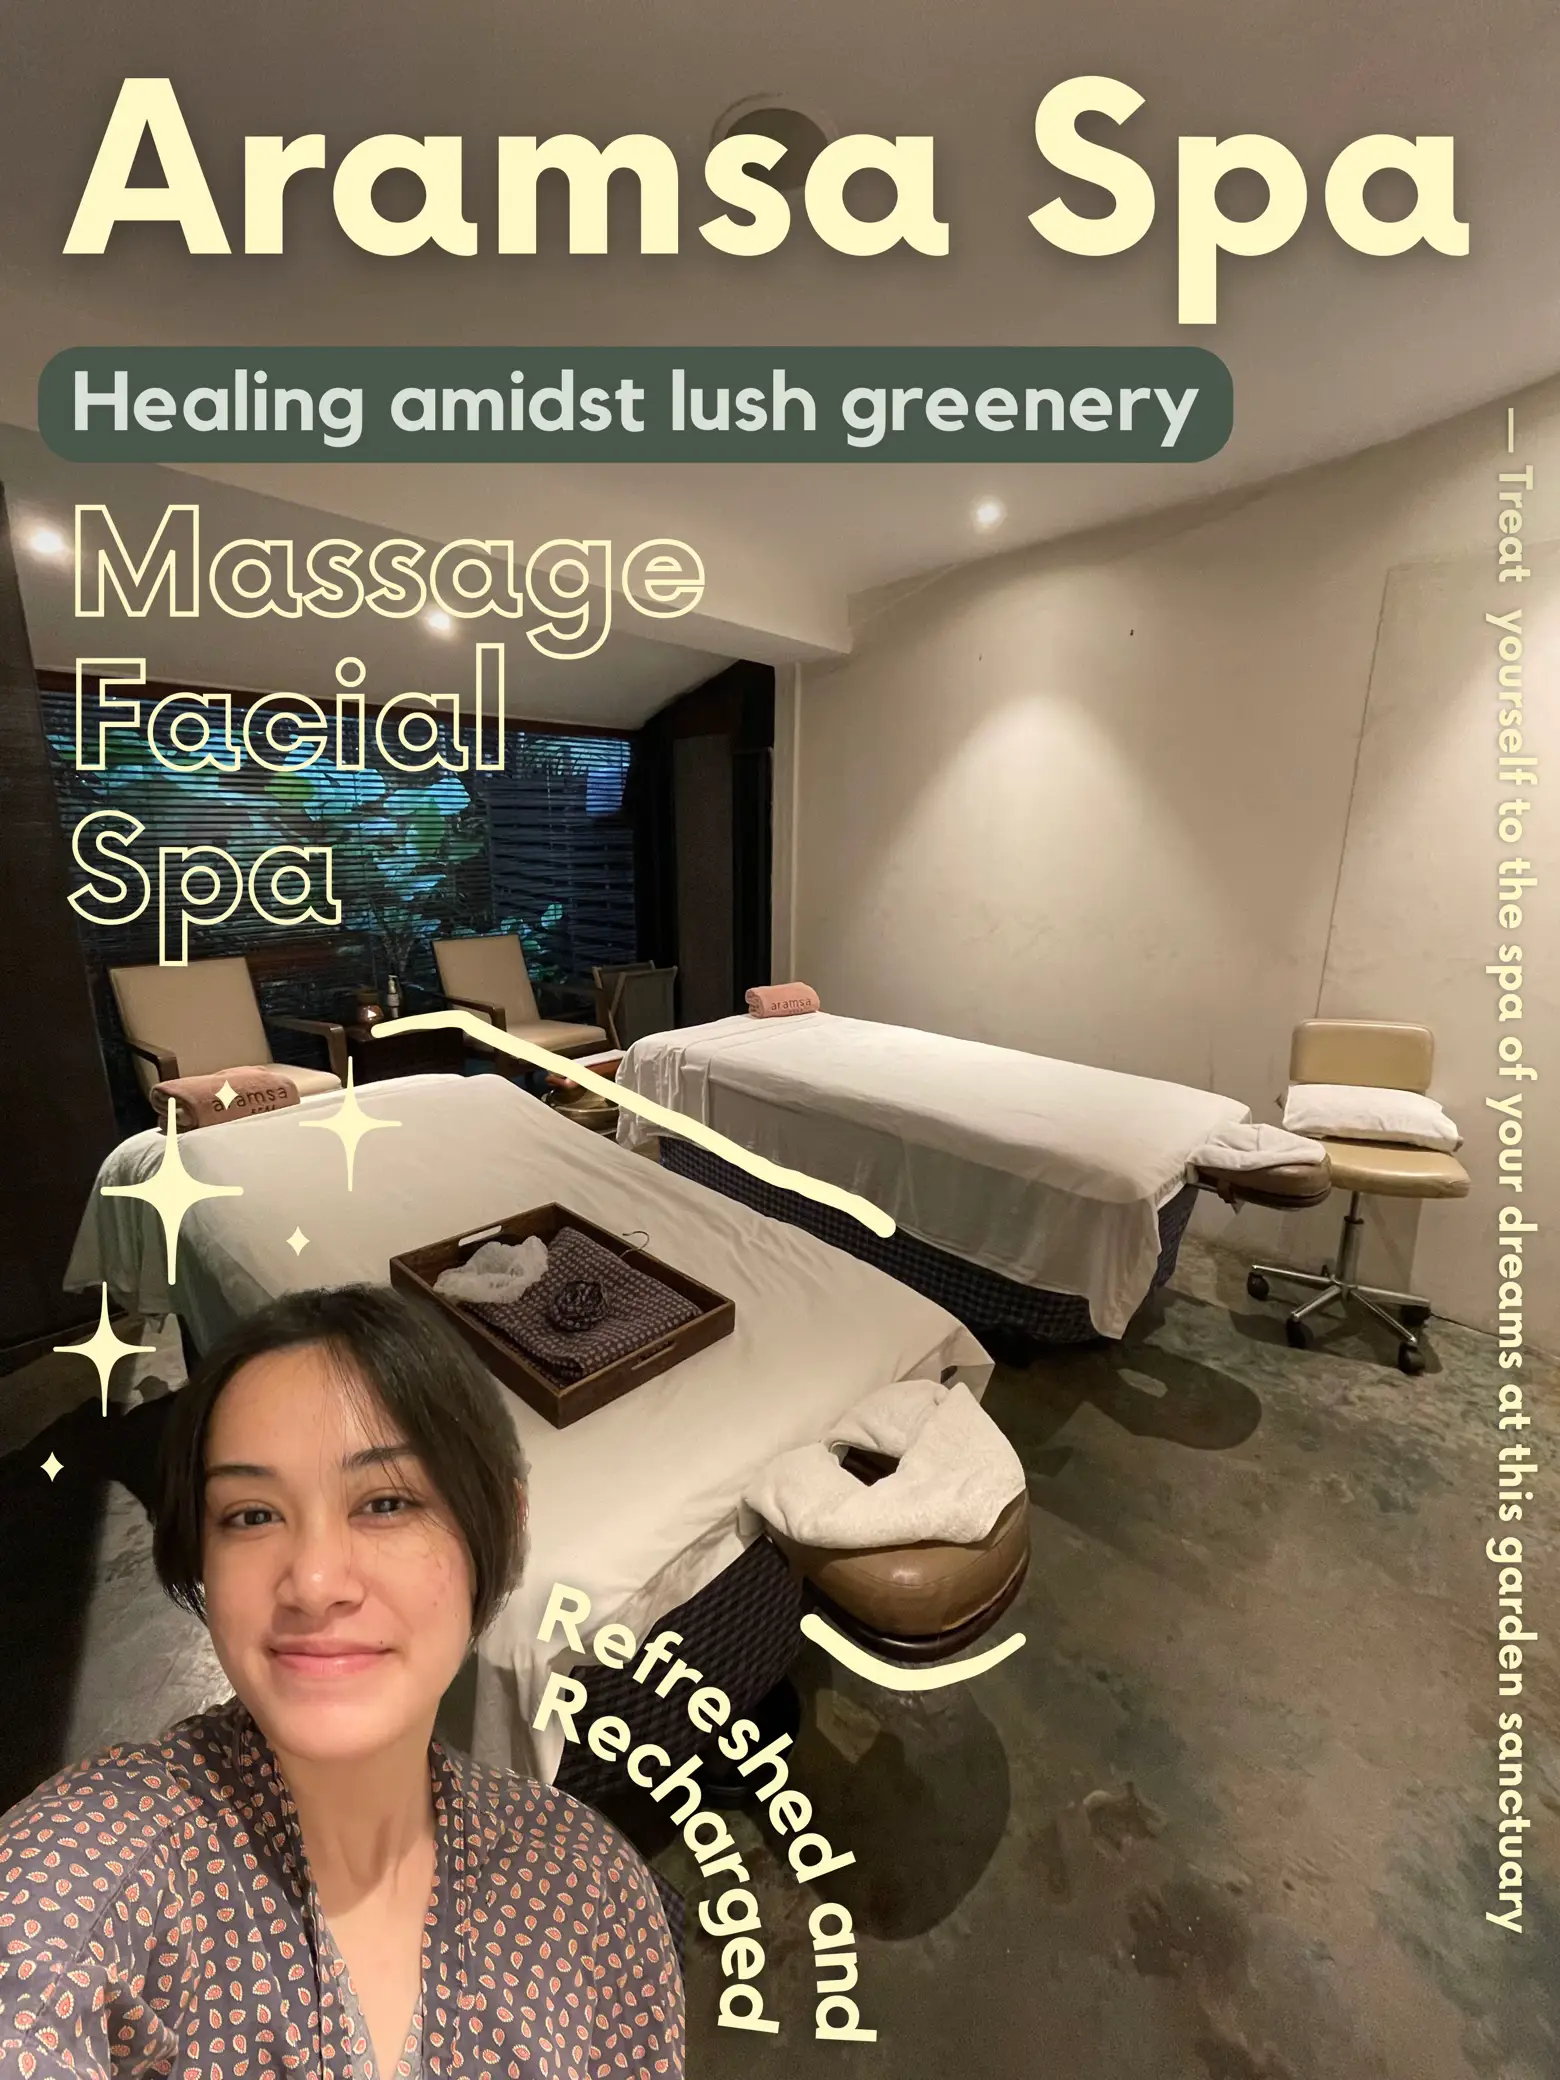 Fell asleep at this Garden Spa 🤤🍃 (affordable!!)'s images(0)